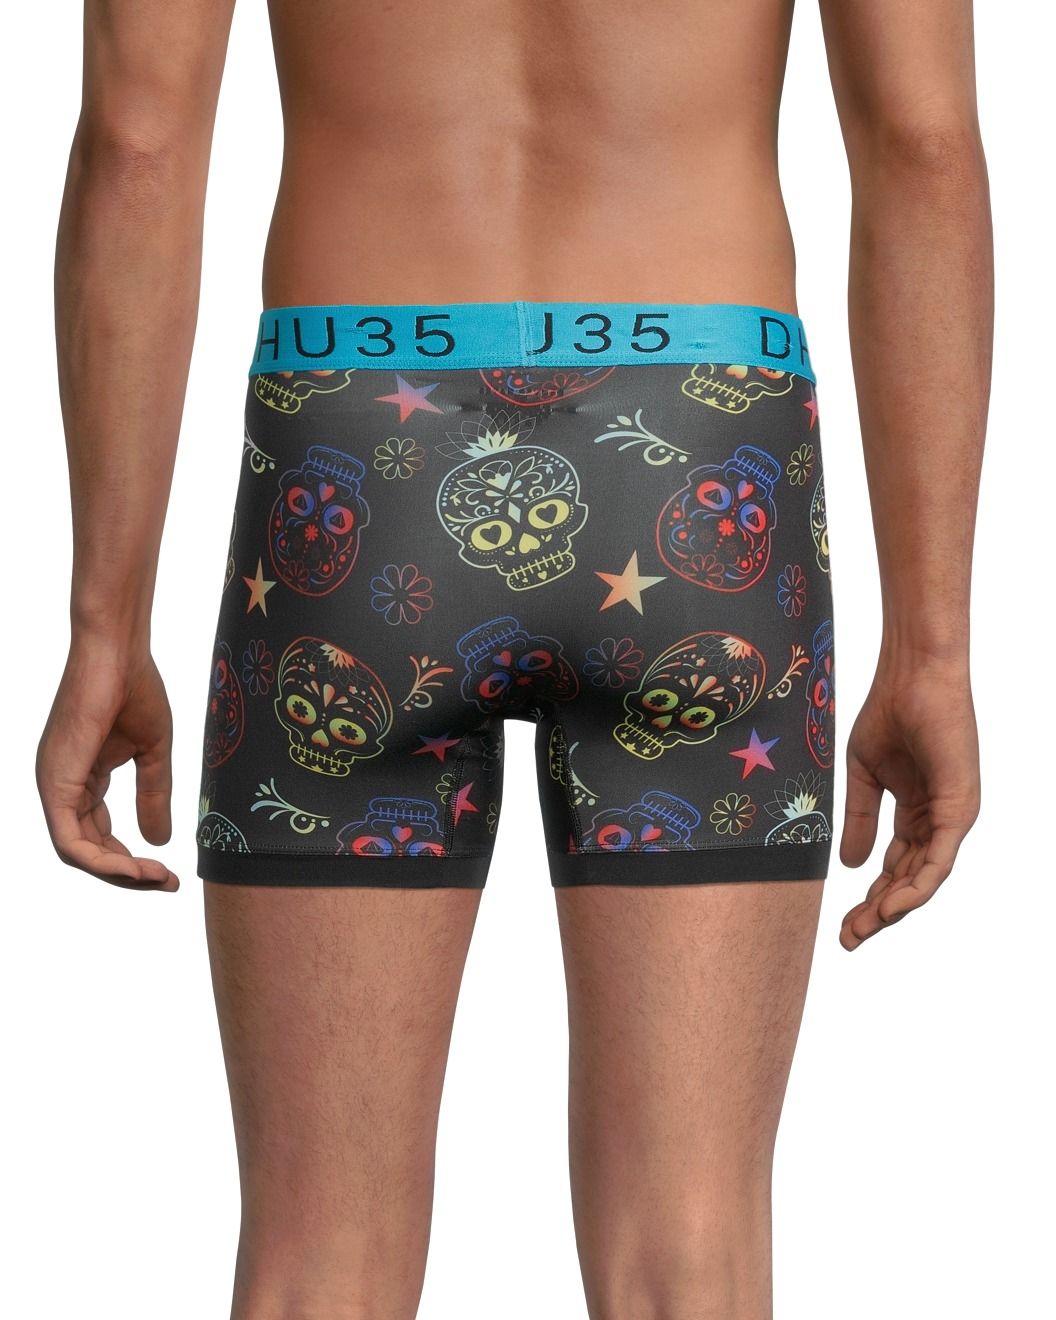 https://media-www.marks.com/product/marks-work-wearhouse/industrial-world/mens-underwear-and-loungewear/410035723827/denver-hayes-men-s-printed-microfibre-boxer-briefs-0c99d63a-9fa9-49f4-8a22-c76c4b328580-jpgrendition.jpg?imdensity=1&imwidth=1244&impolicy=mZoom